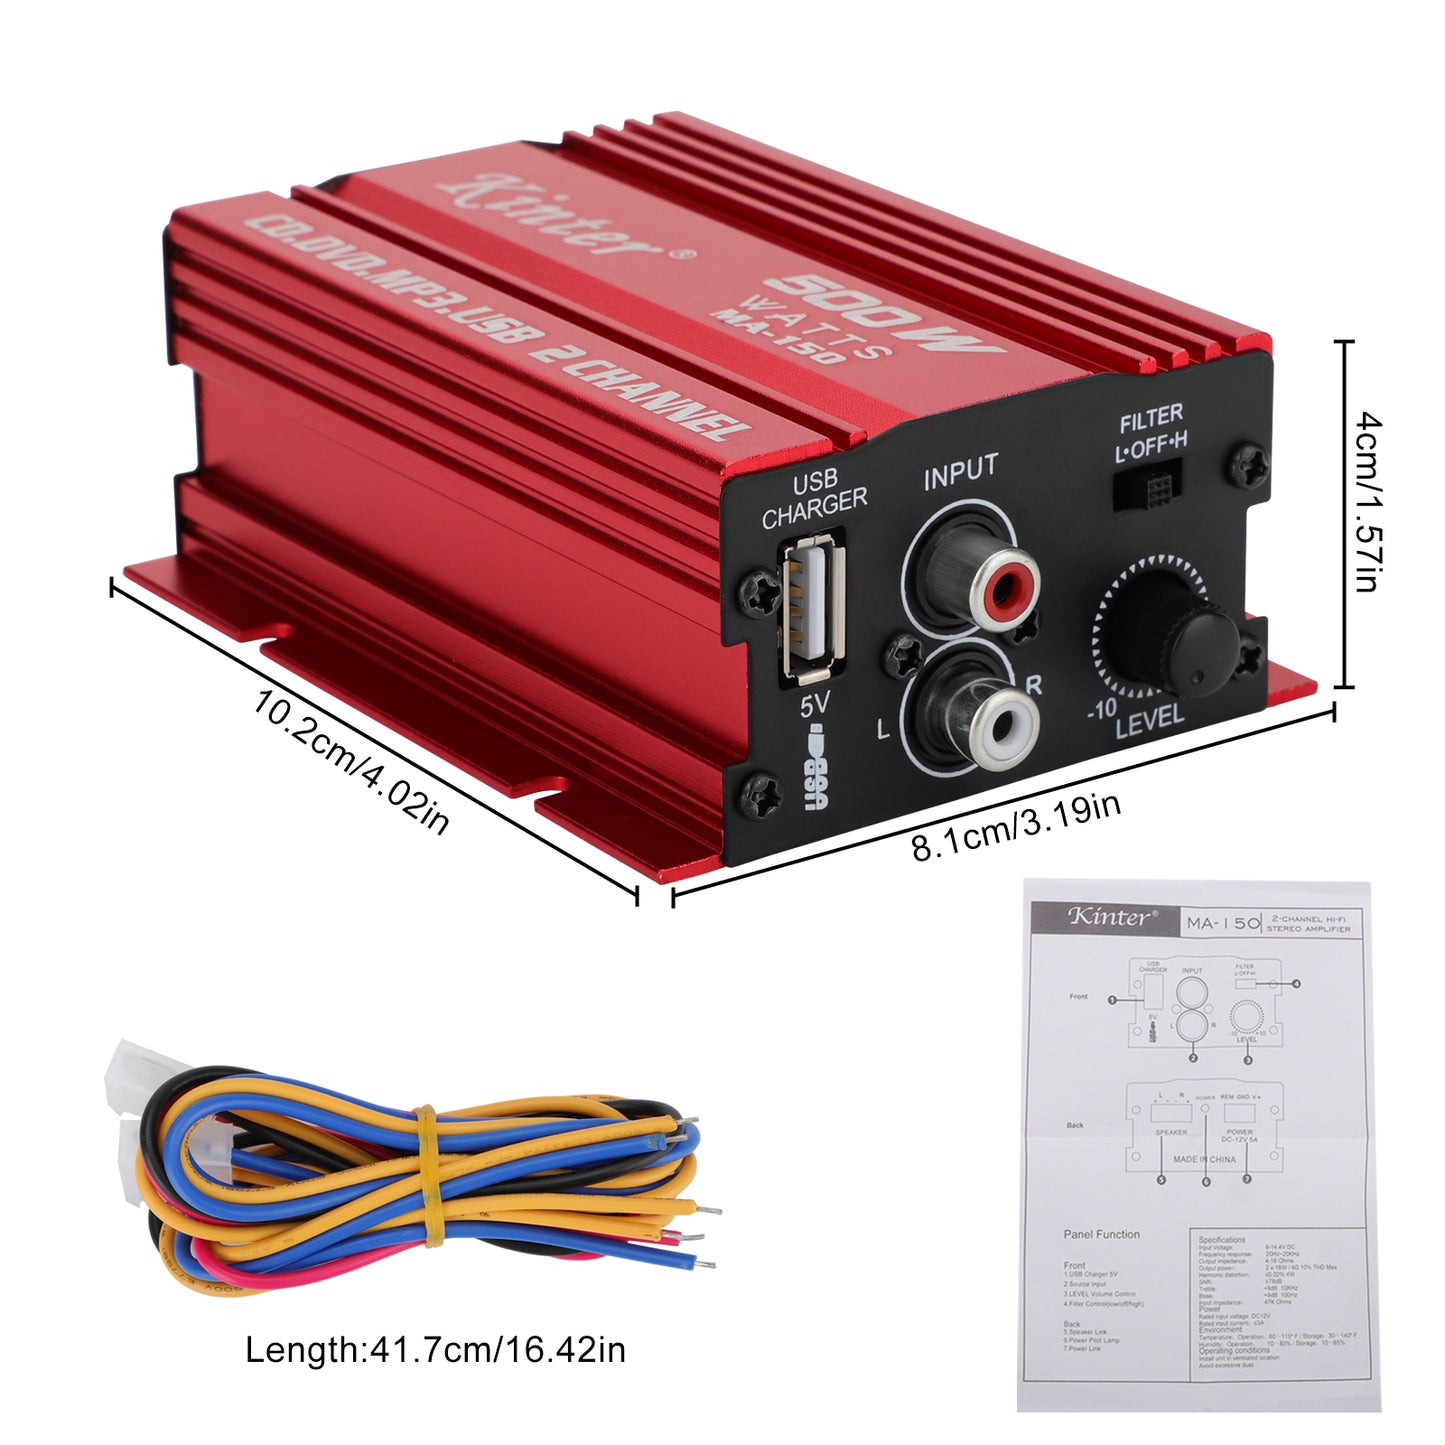 MA150 500W Compact 12V Car Mounted Power Amplifier - 2 Channels, Lightweight Aluminum Casing, Ideal for Car and Home Audio